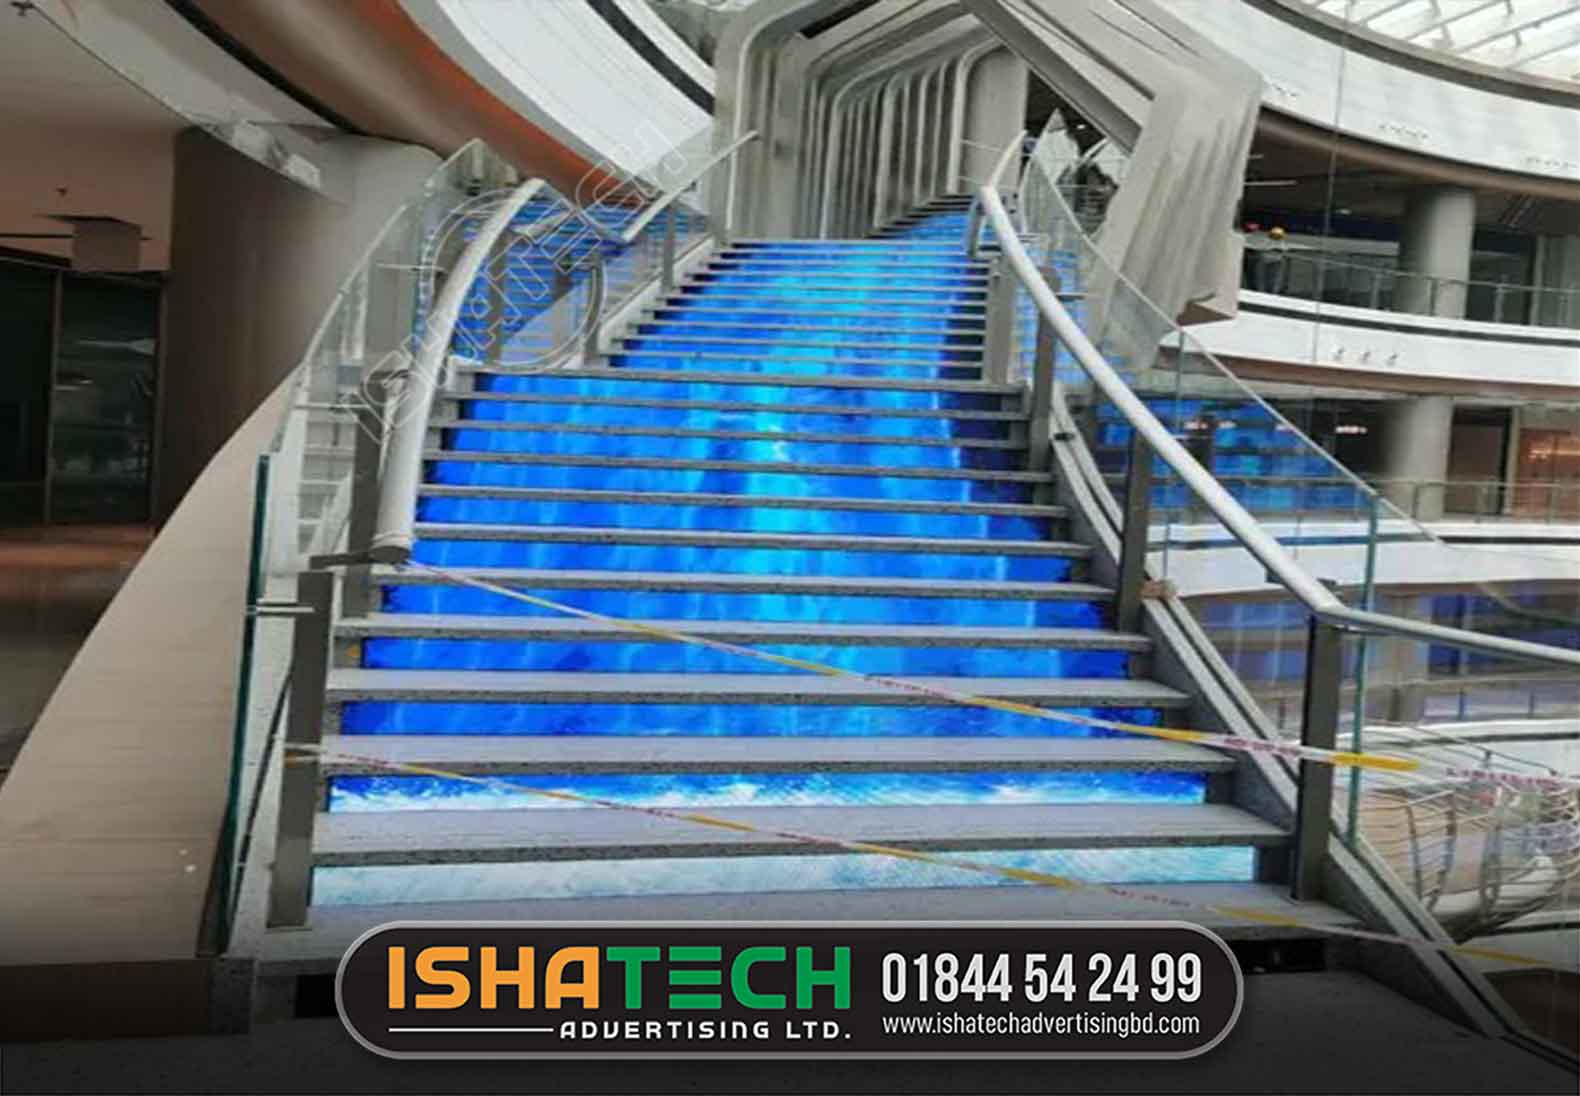 LED Induction Floor Tile Display Screen for Indoor Stairs in Shopping Malls and Hotels |